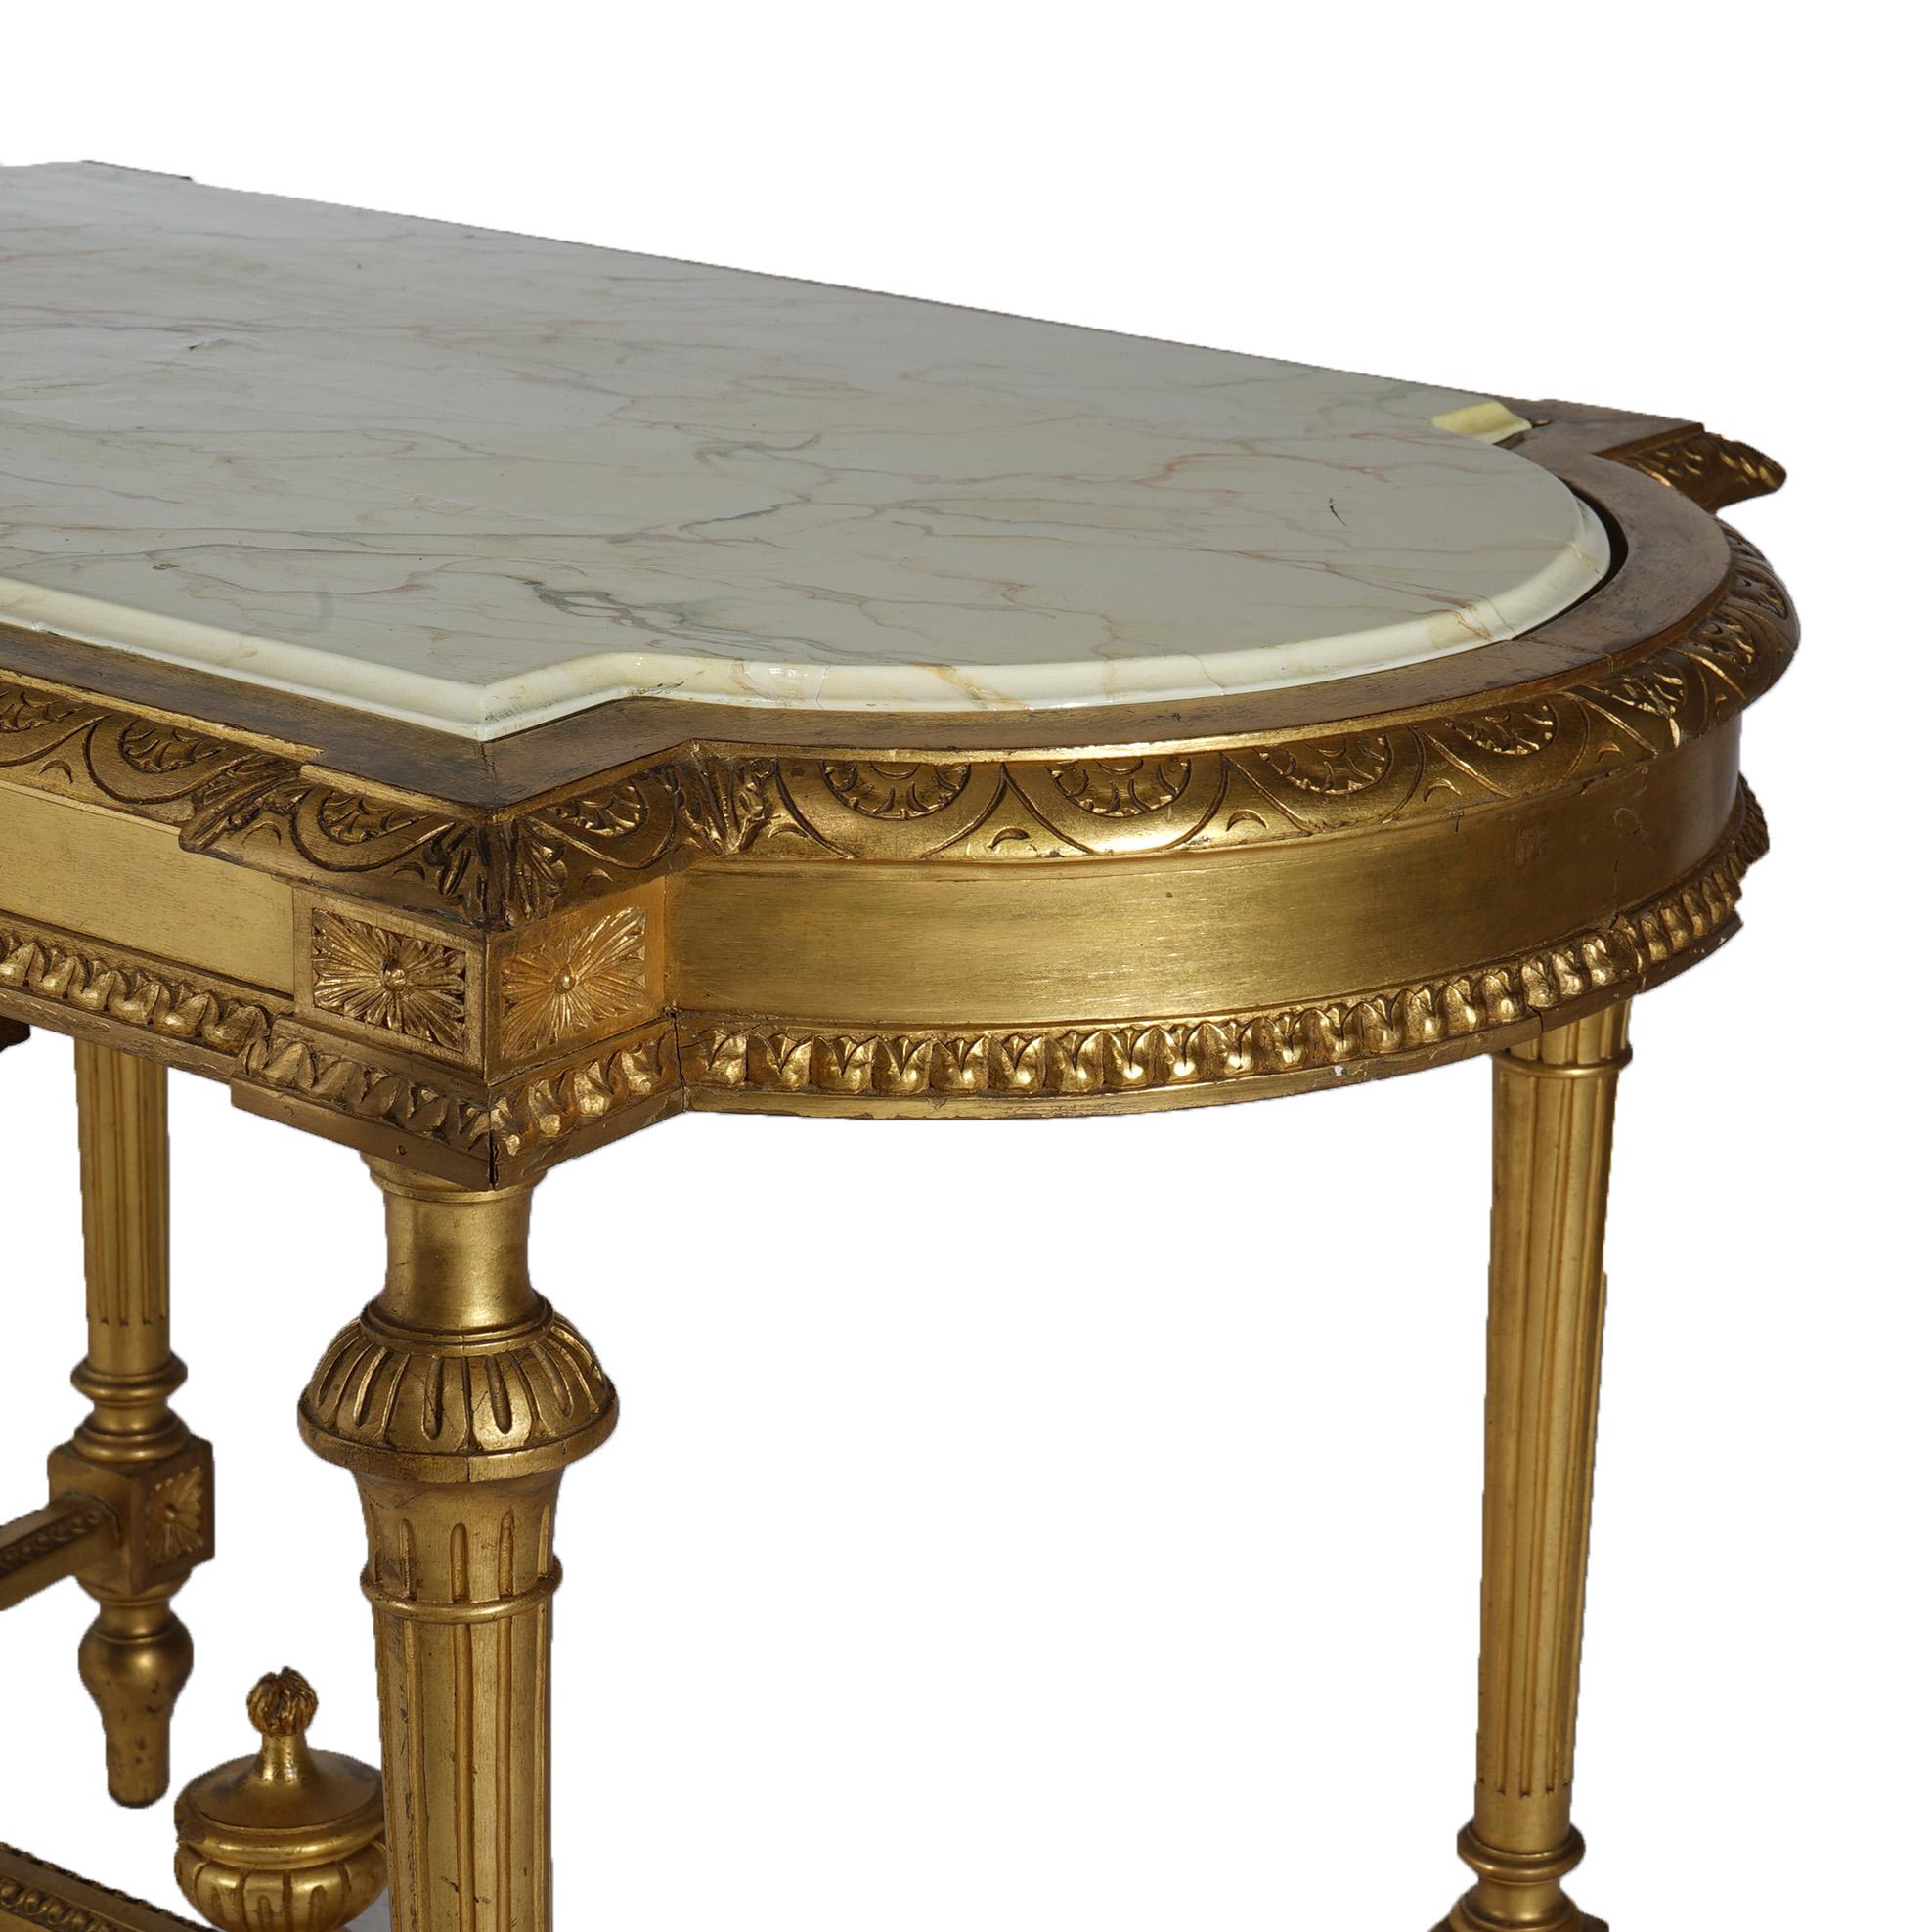 Antique French Louis XVI Style Giltwood Parlor Table with Faux Painted Top 19thC For Sale 4